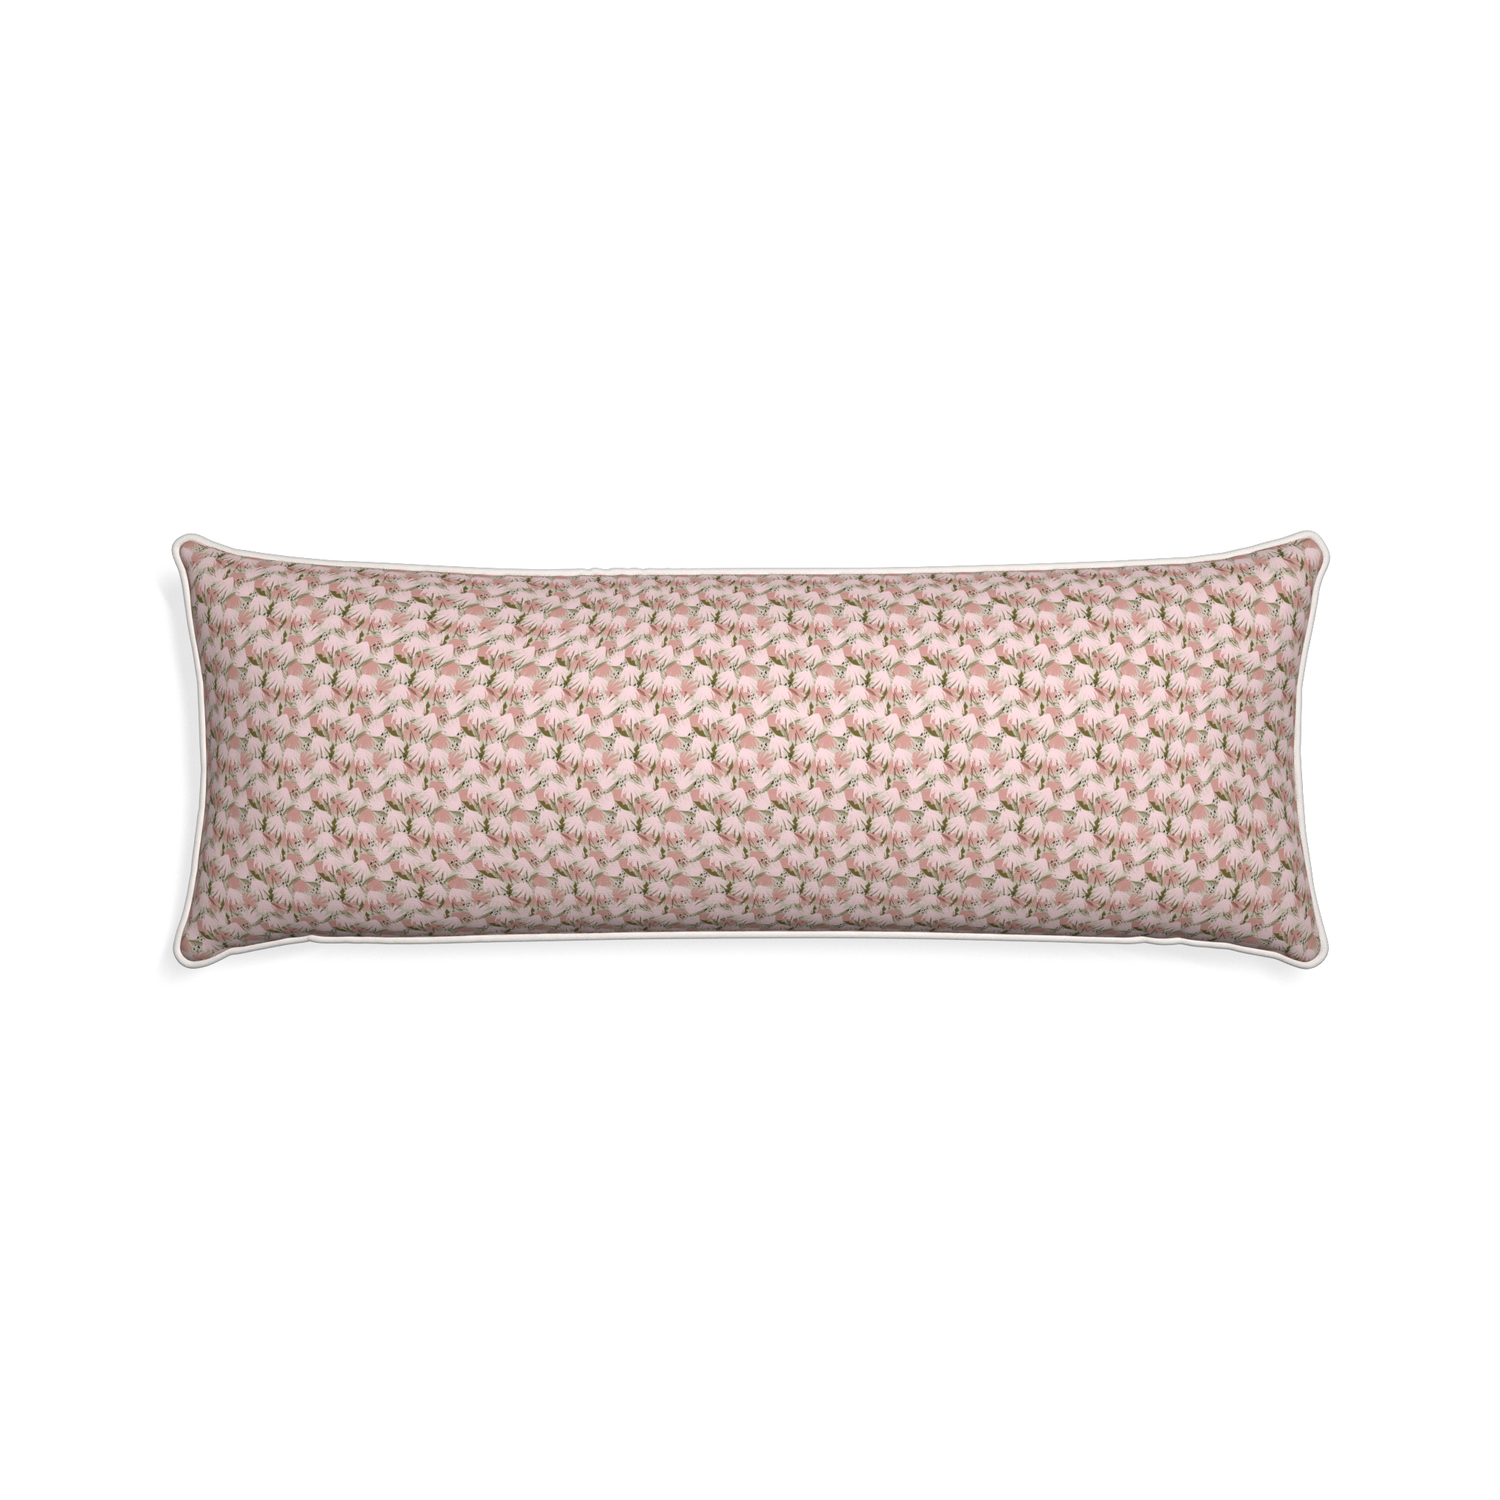 Xl-lumbar eden pink custom pillow with snow piping on white background